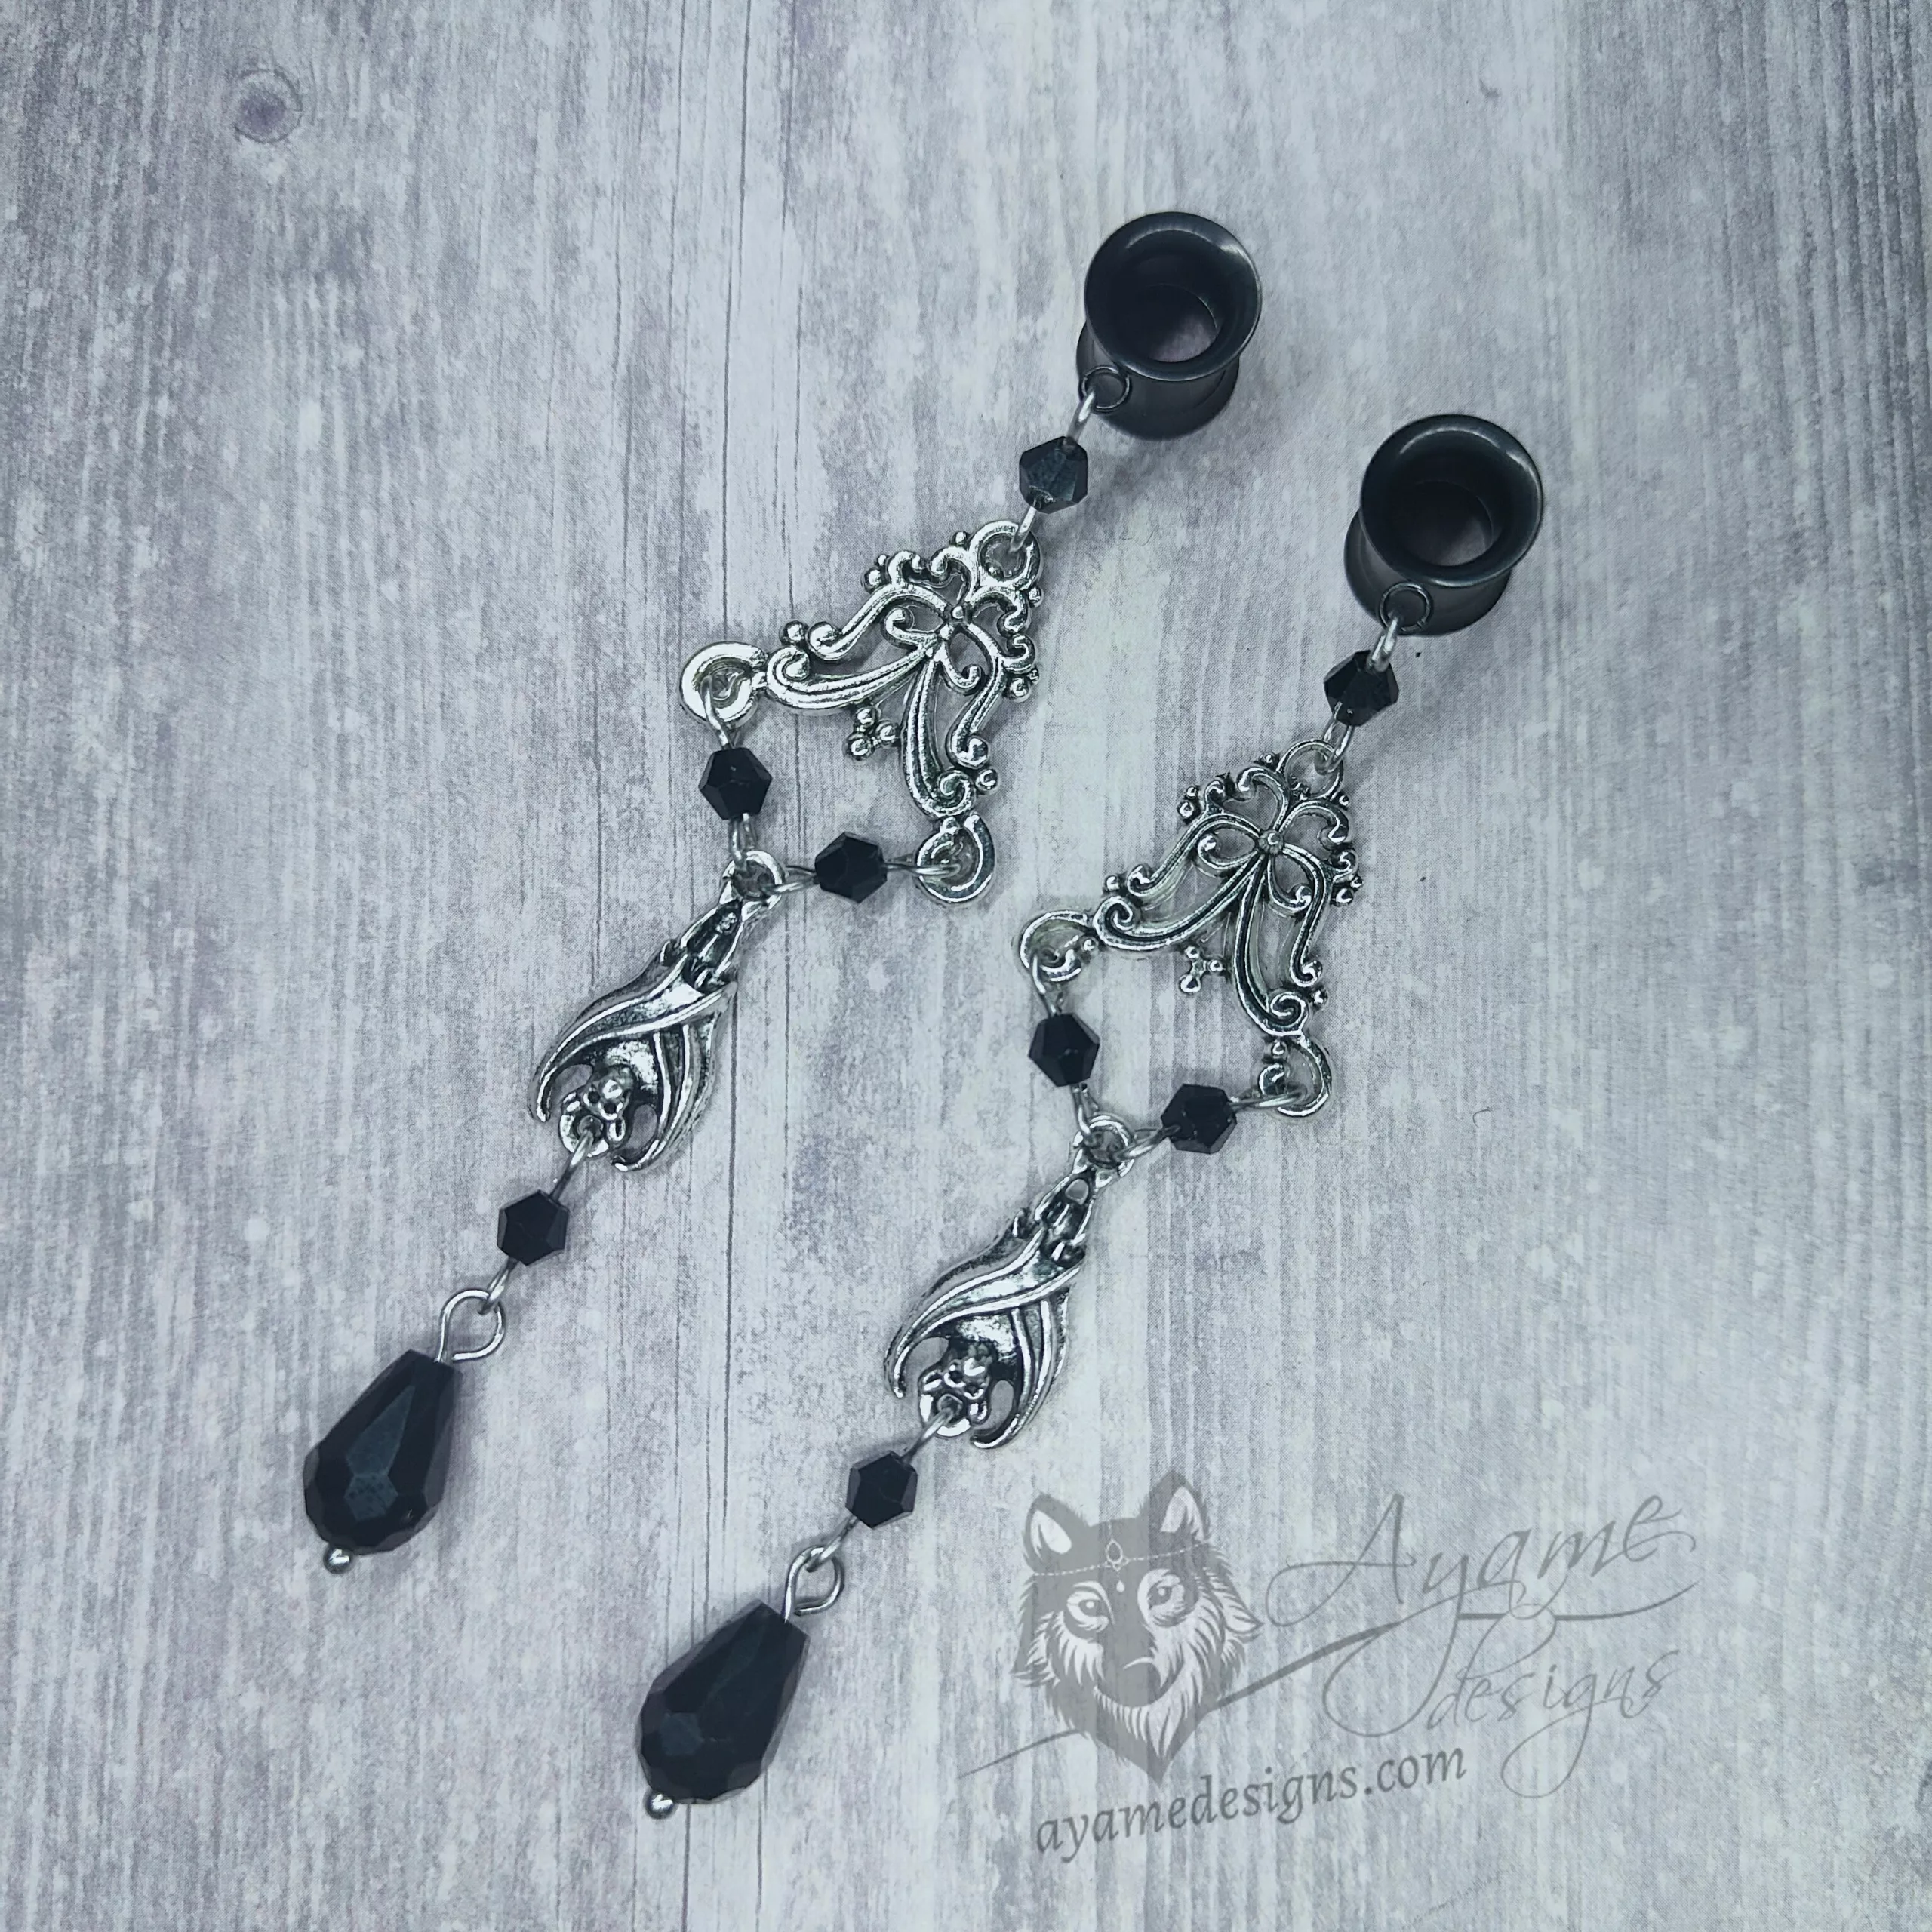 Handmade gothic dangly stainless steel tunnels for stretched ears with bats and filigree charms, and black Austrian crystal beads